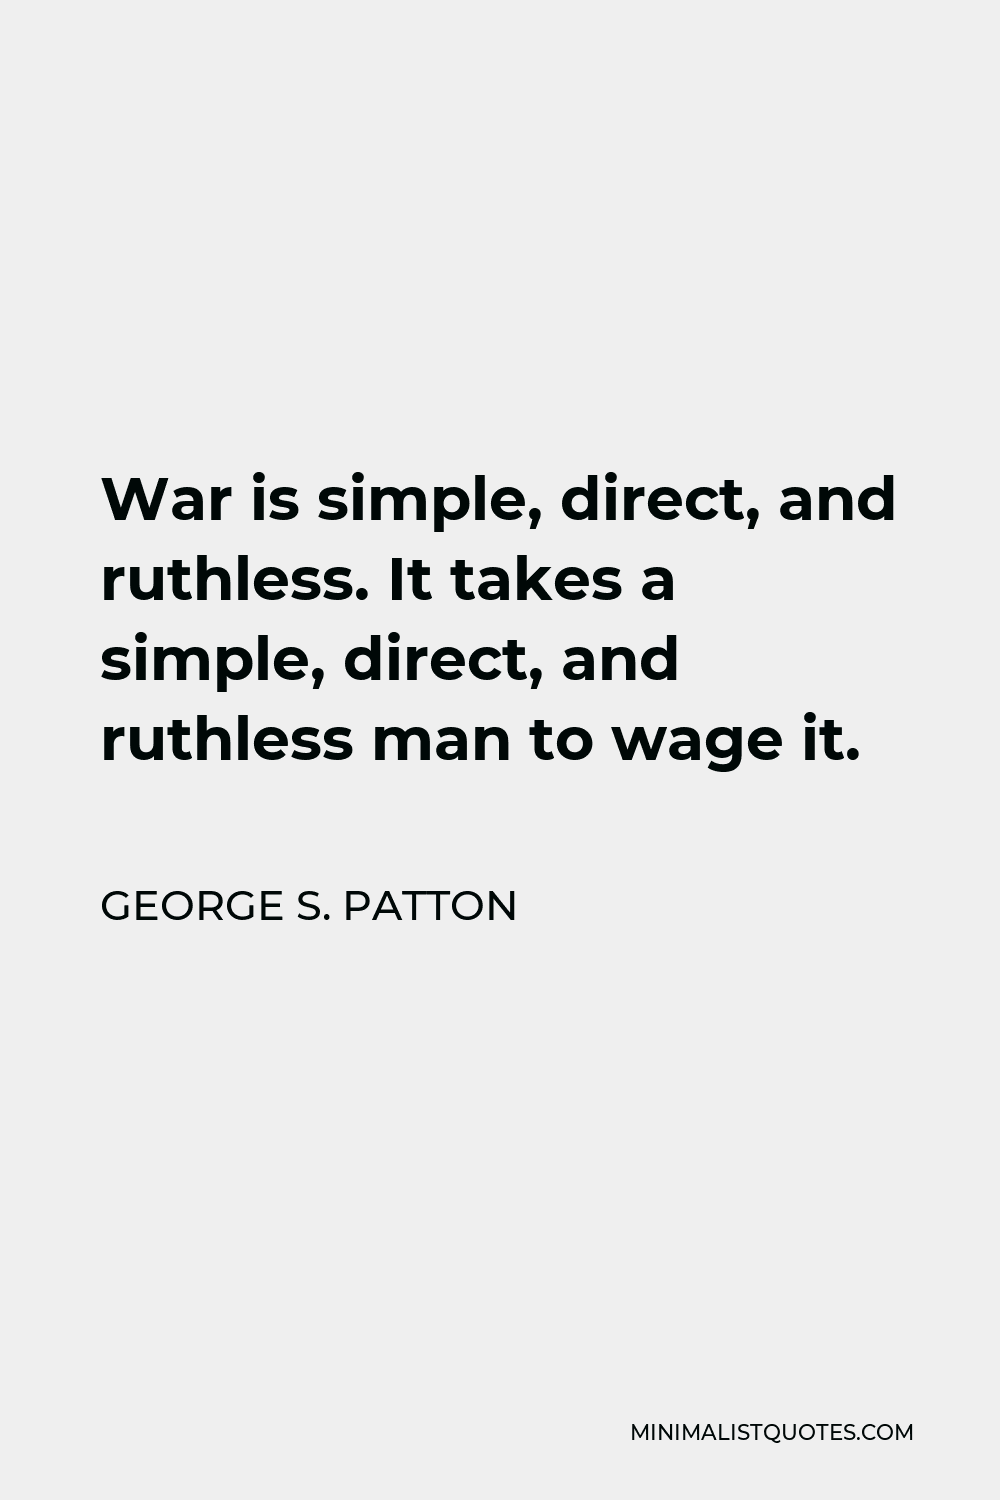 George S. Patton Quote - War is simple, direct, and ruthless. It takes a simple, direct, and ruthless man to wage it.